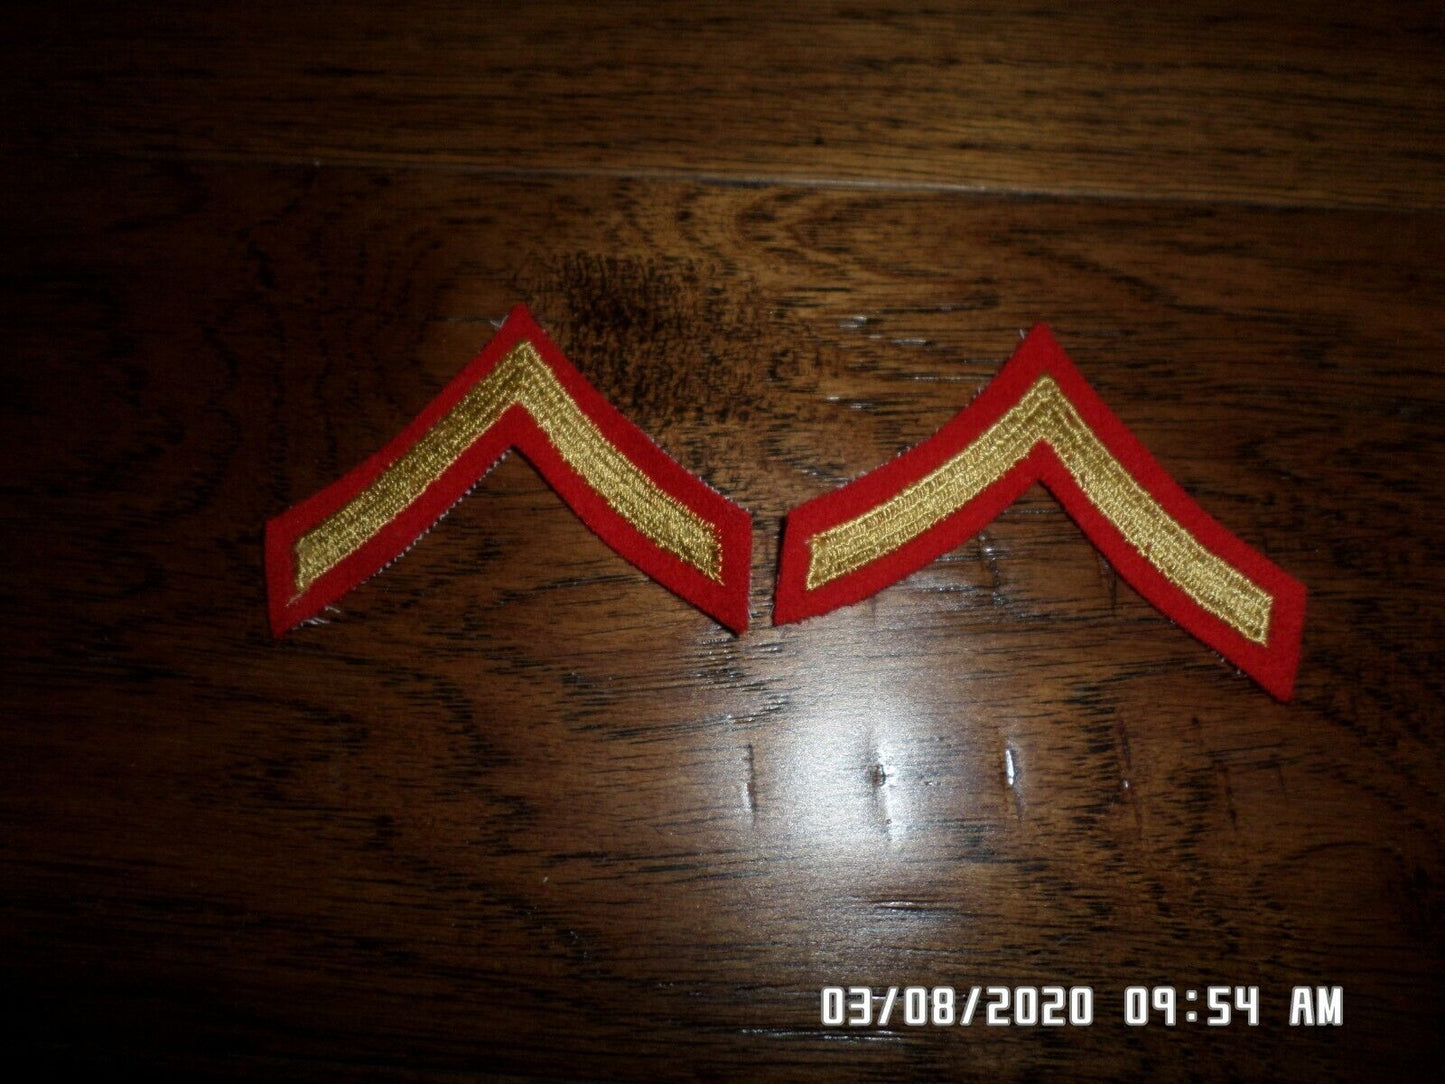 MARINE CORPS PRIVATE FIRST CLASS PATCHES FEMALE DRESS BLUES UNIFORM CHEVRON